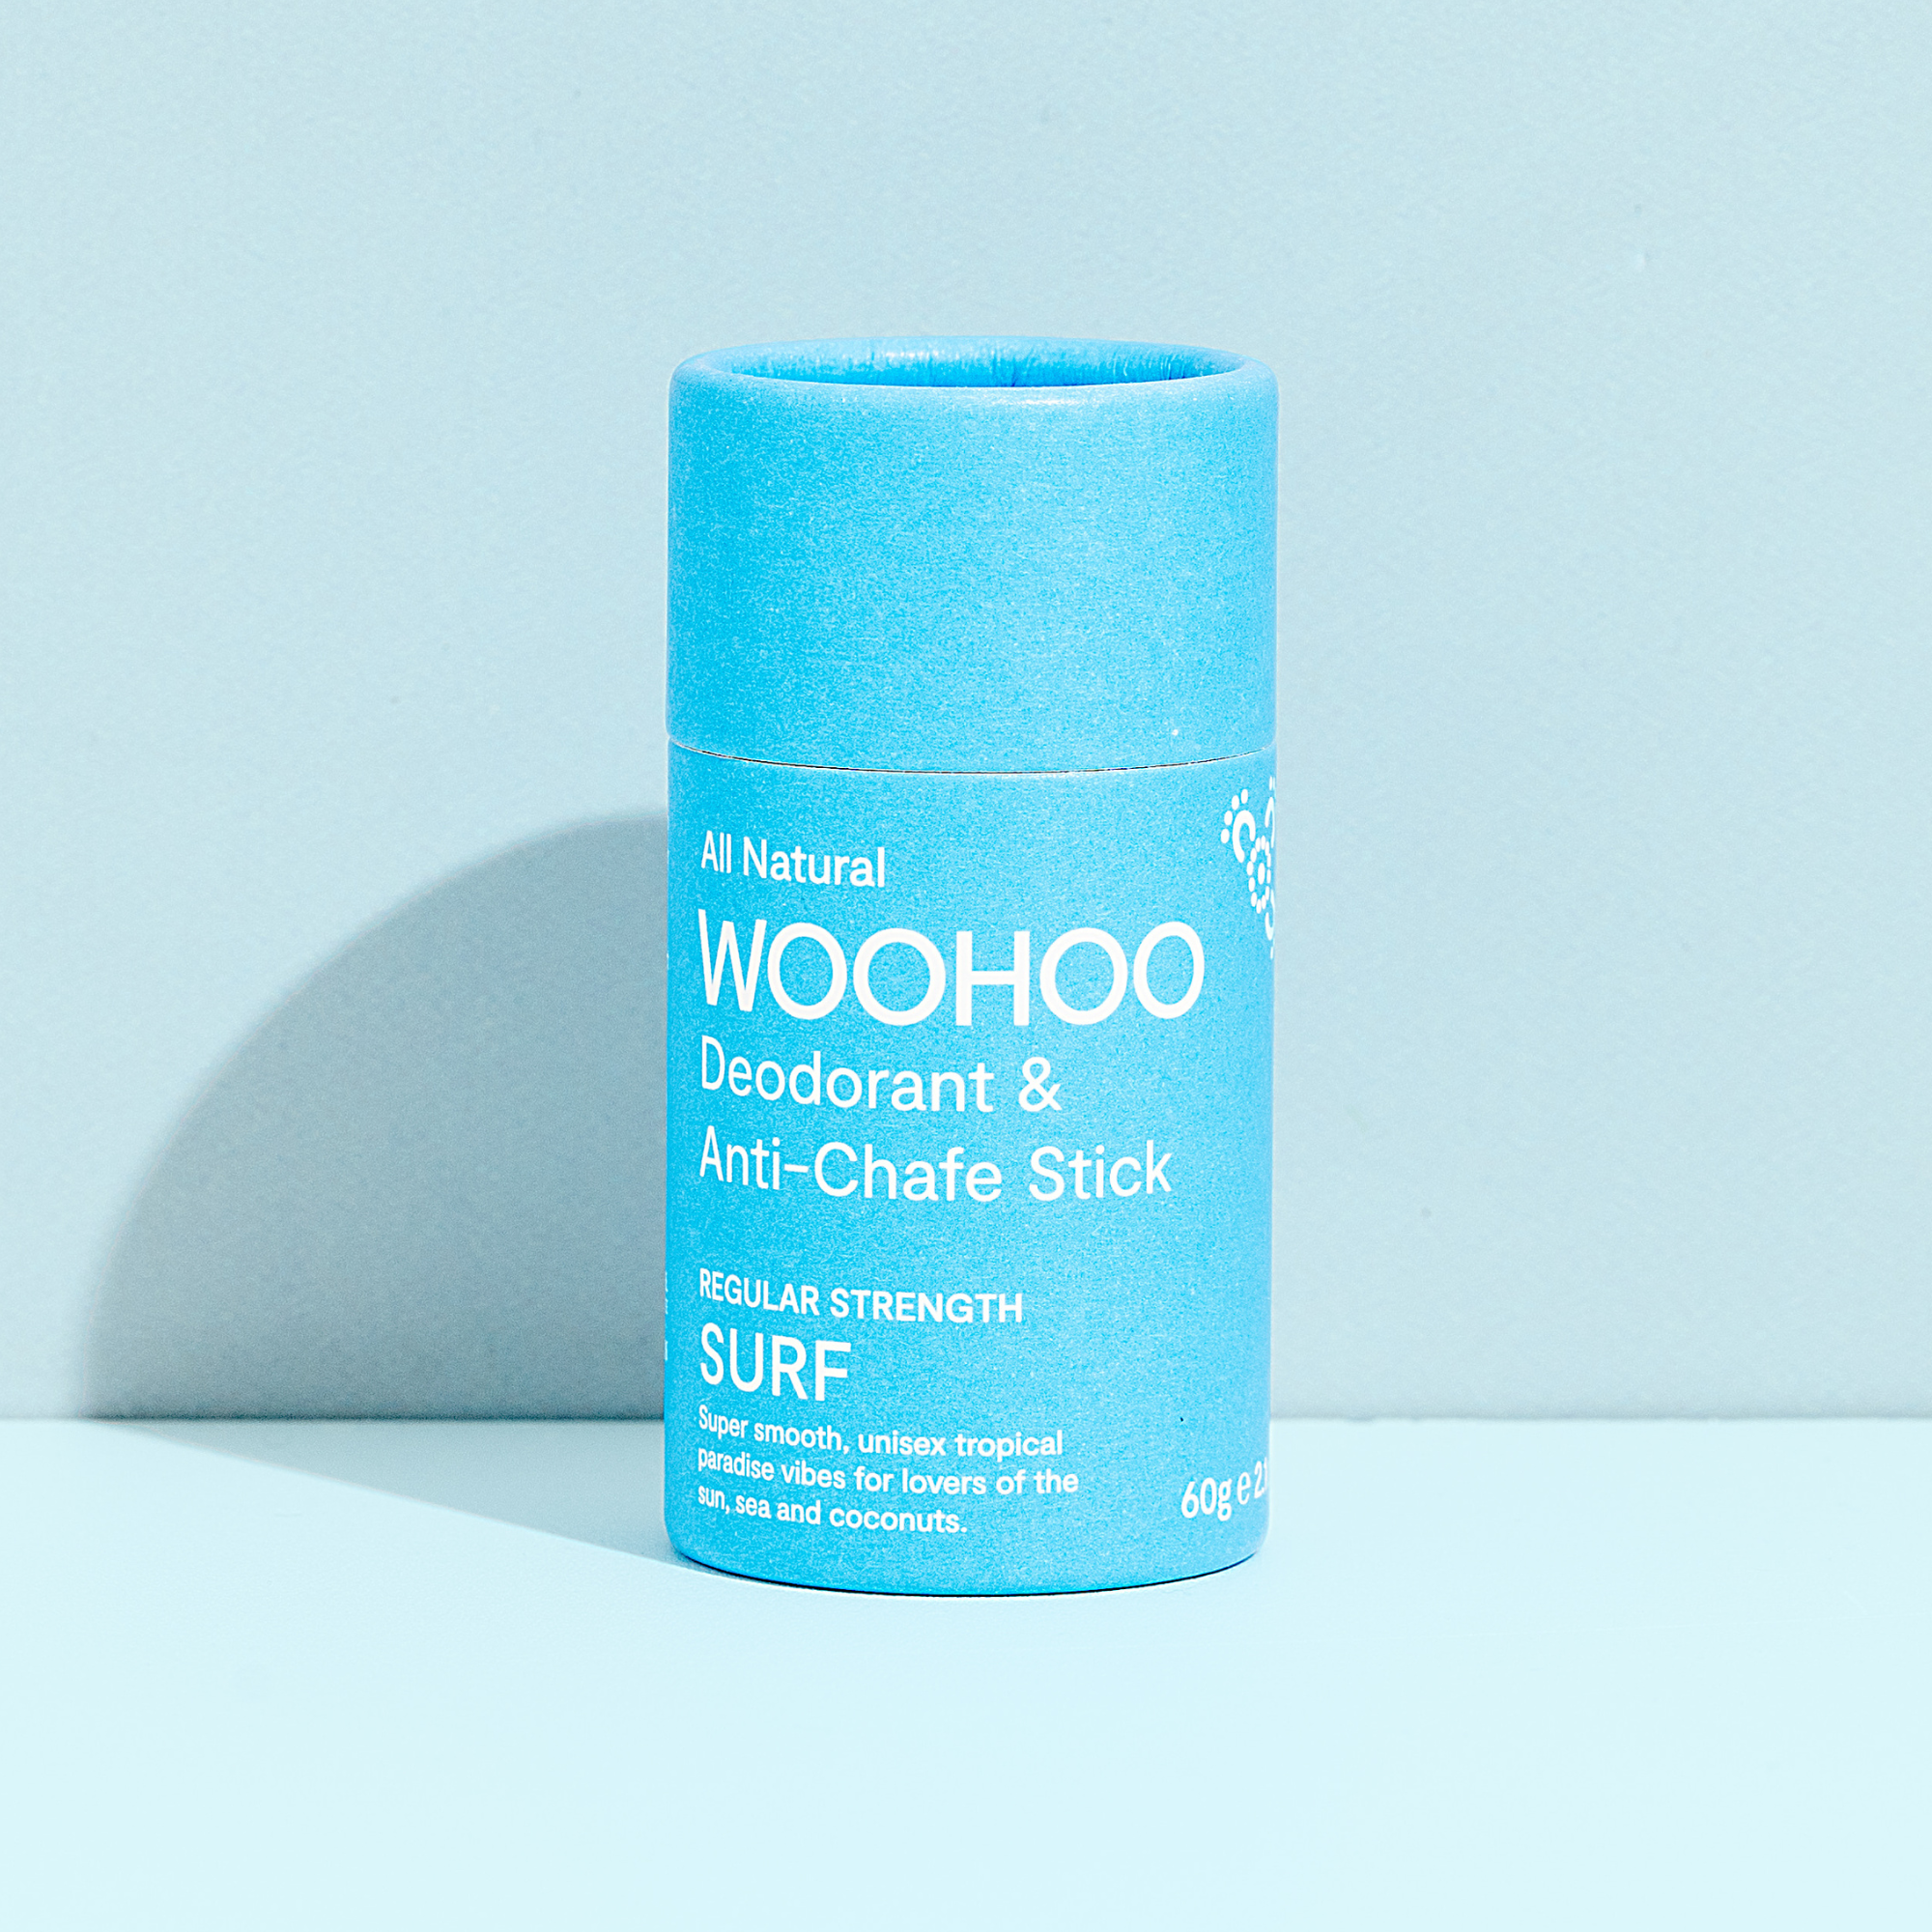 woohoo surf all natural deodorant and anti-chafe stick 60 grams front of packaging tube